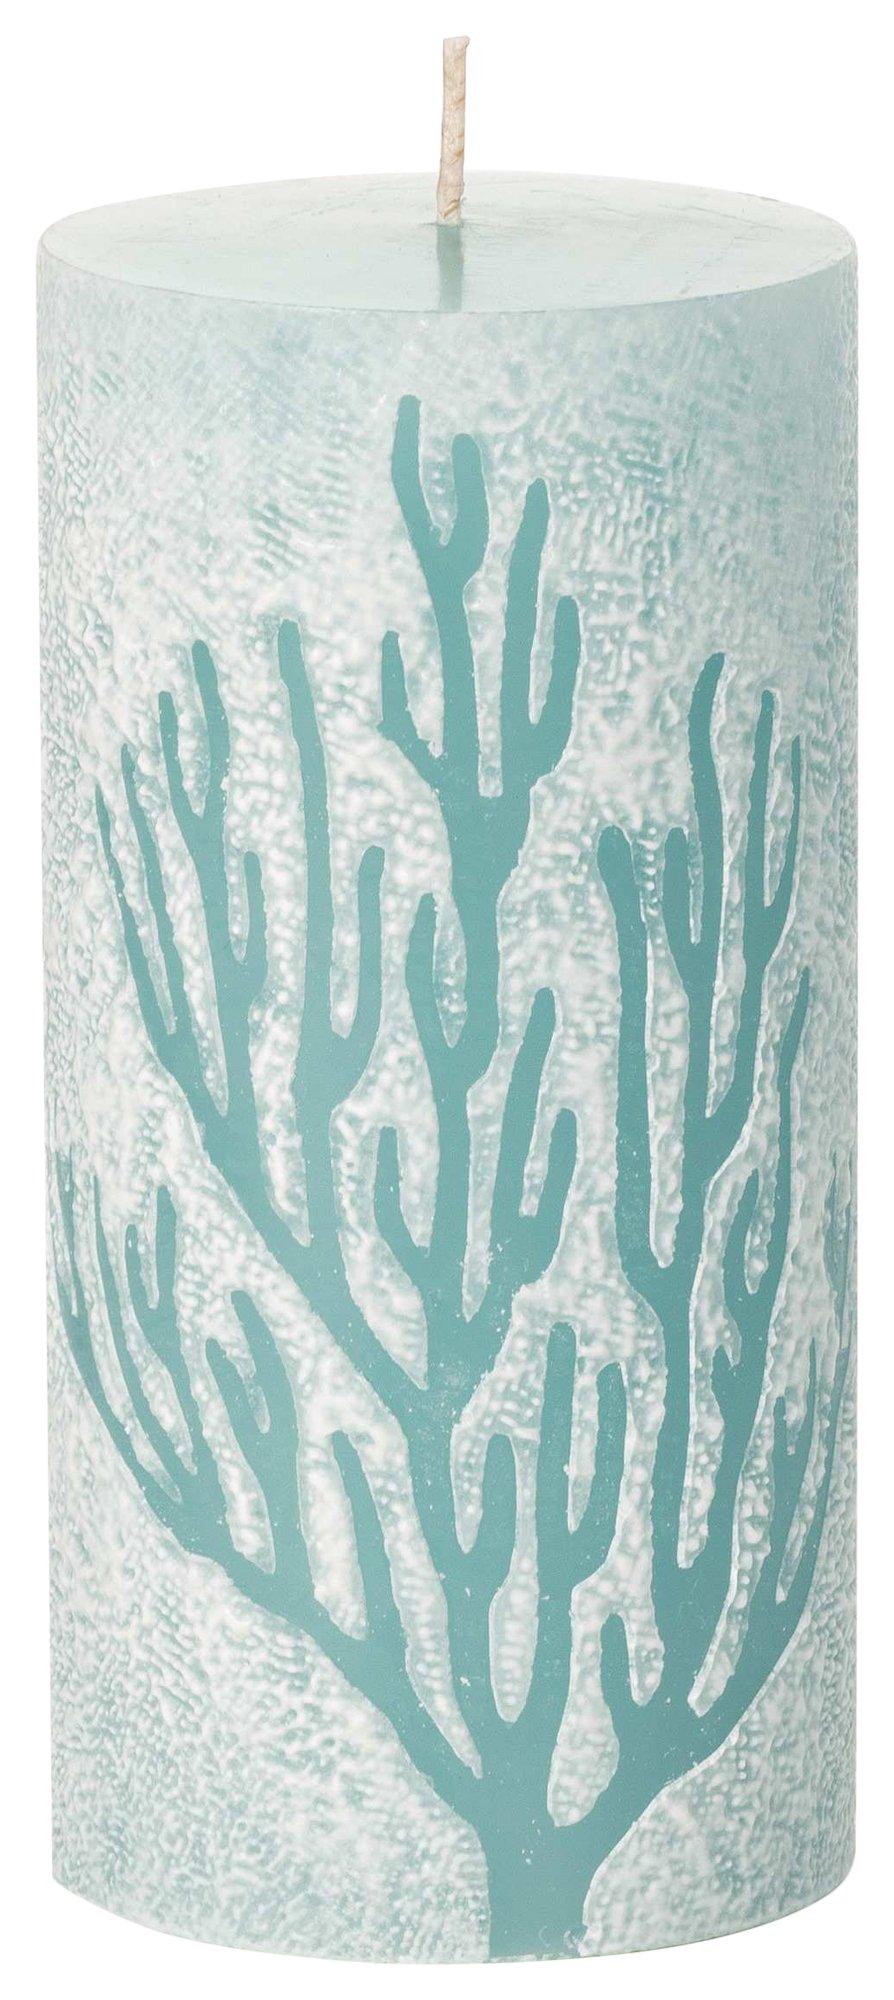 6in Unscented Coral Tree Pillar Candle